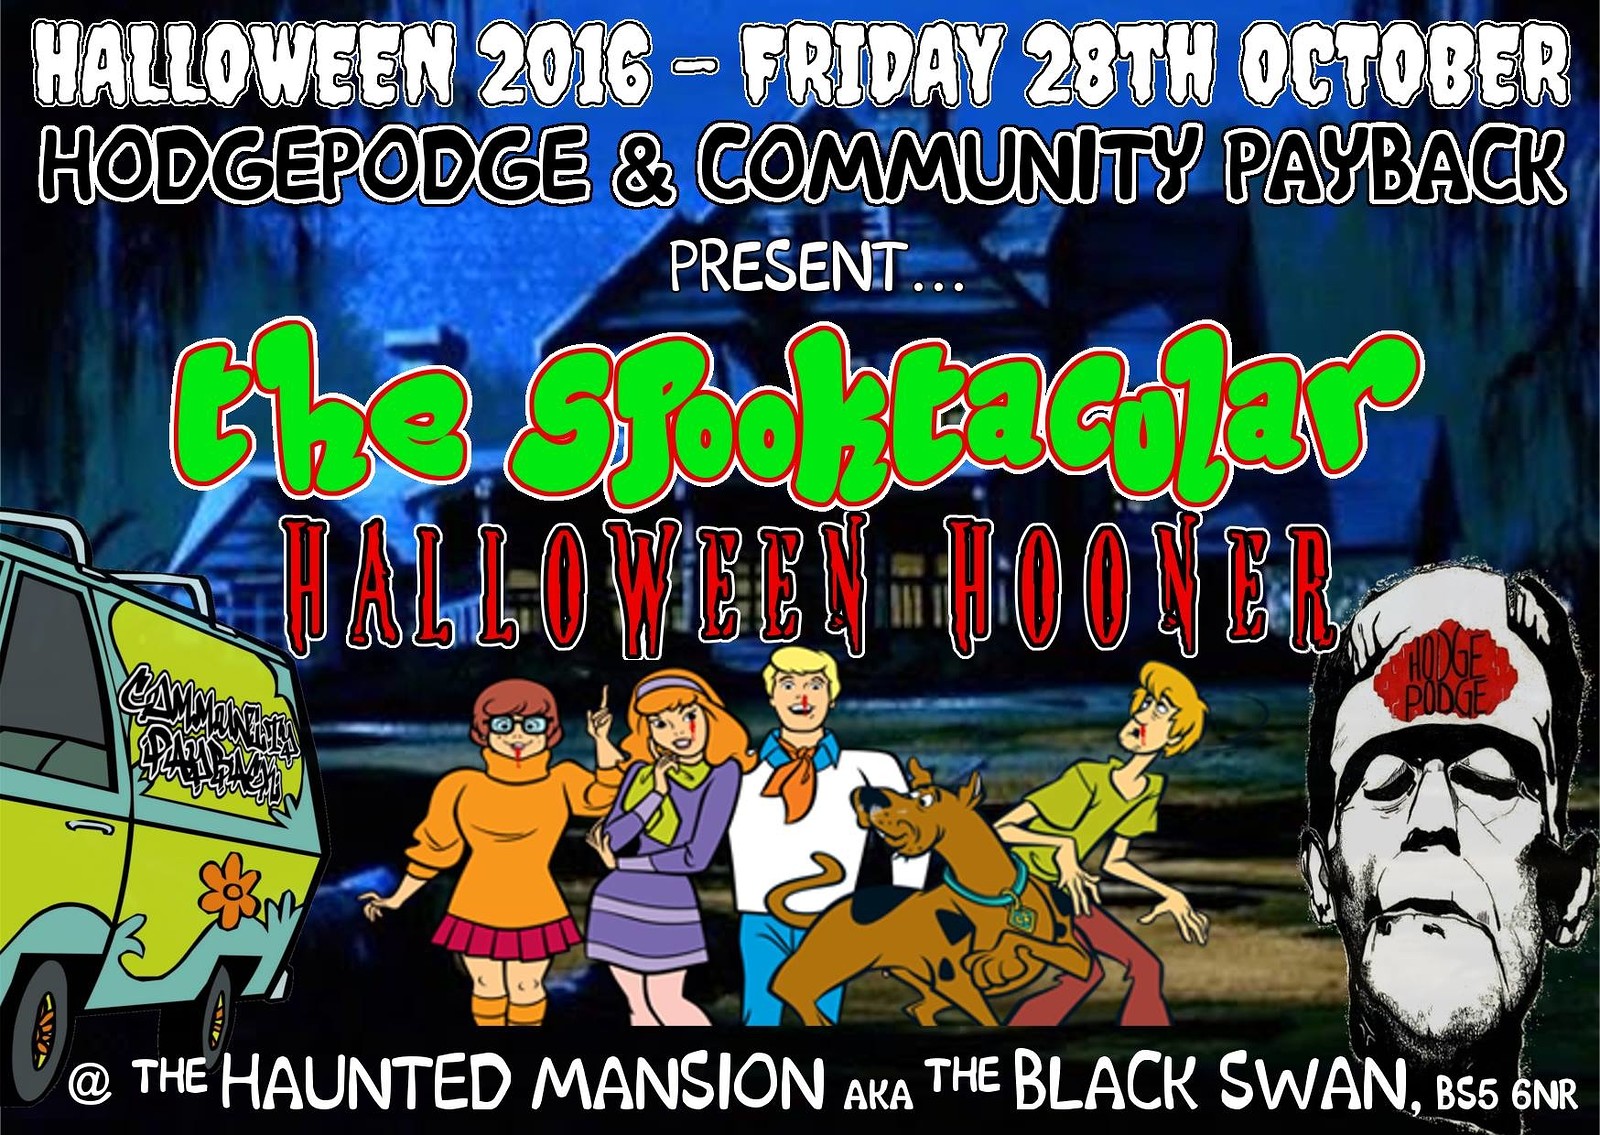 Hodgepodge & Community Payback at The Black Swan